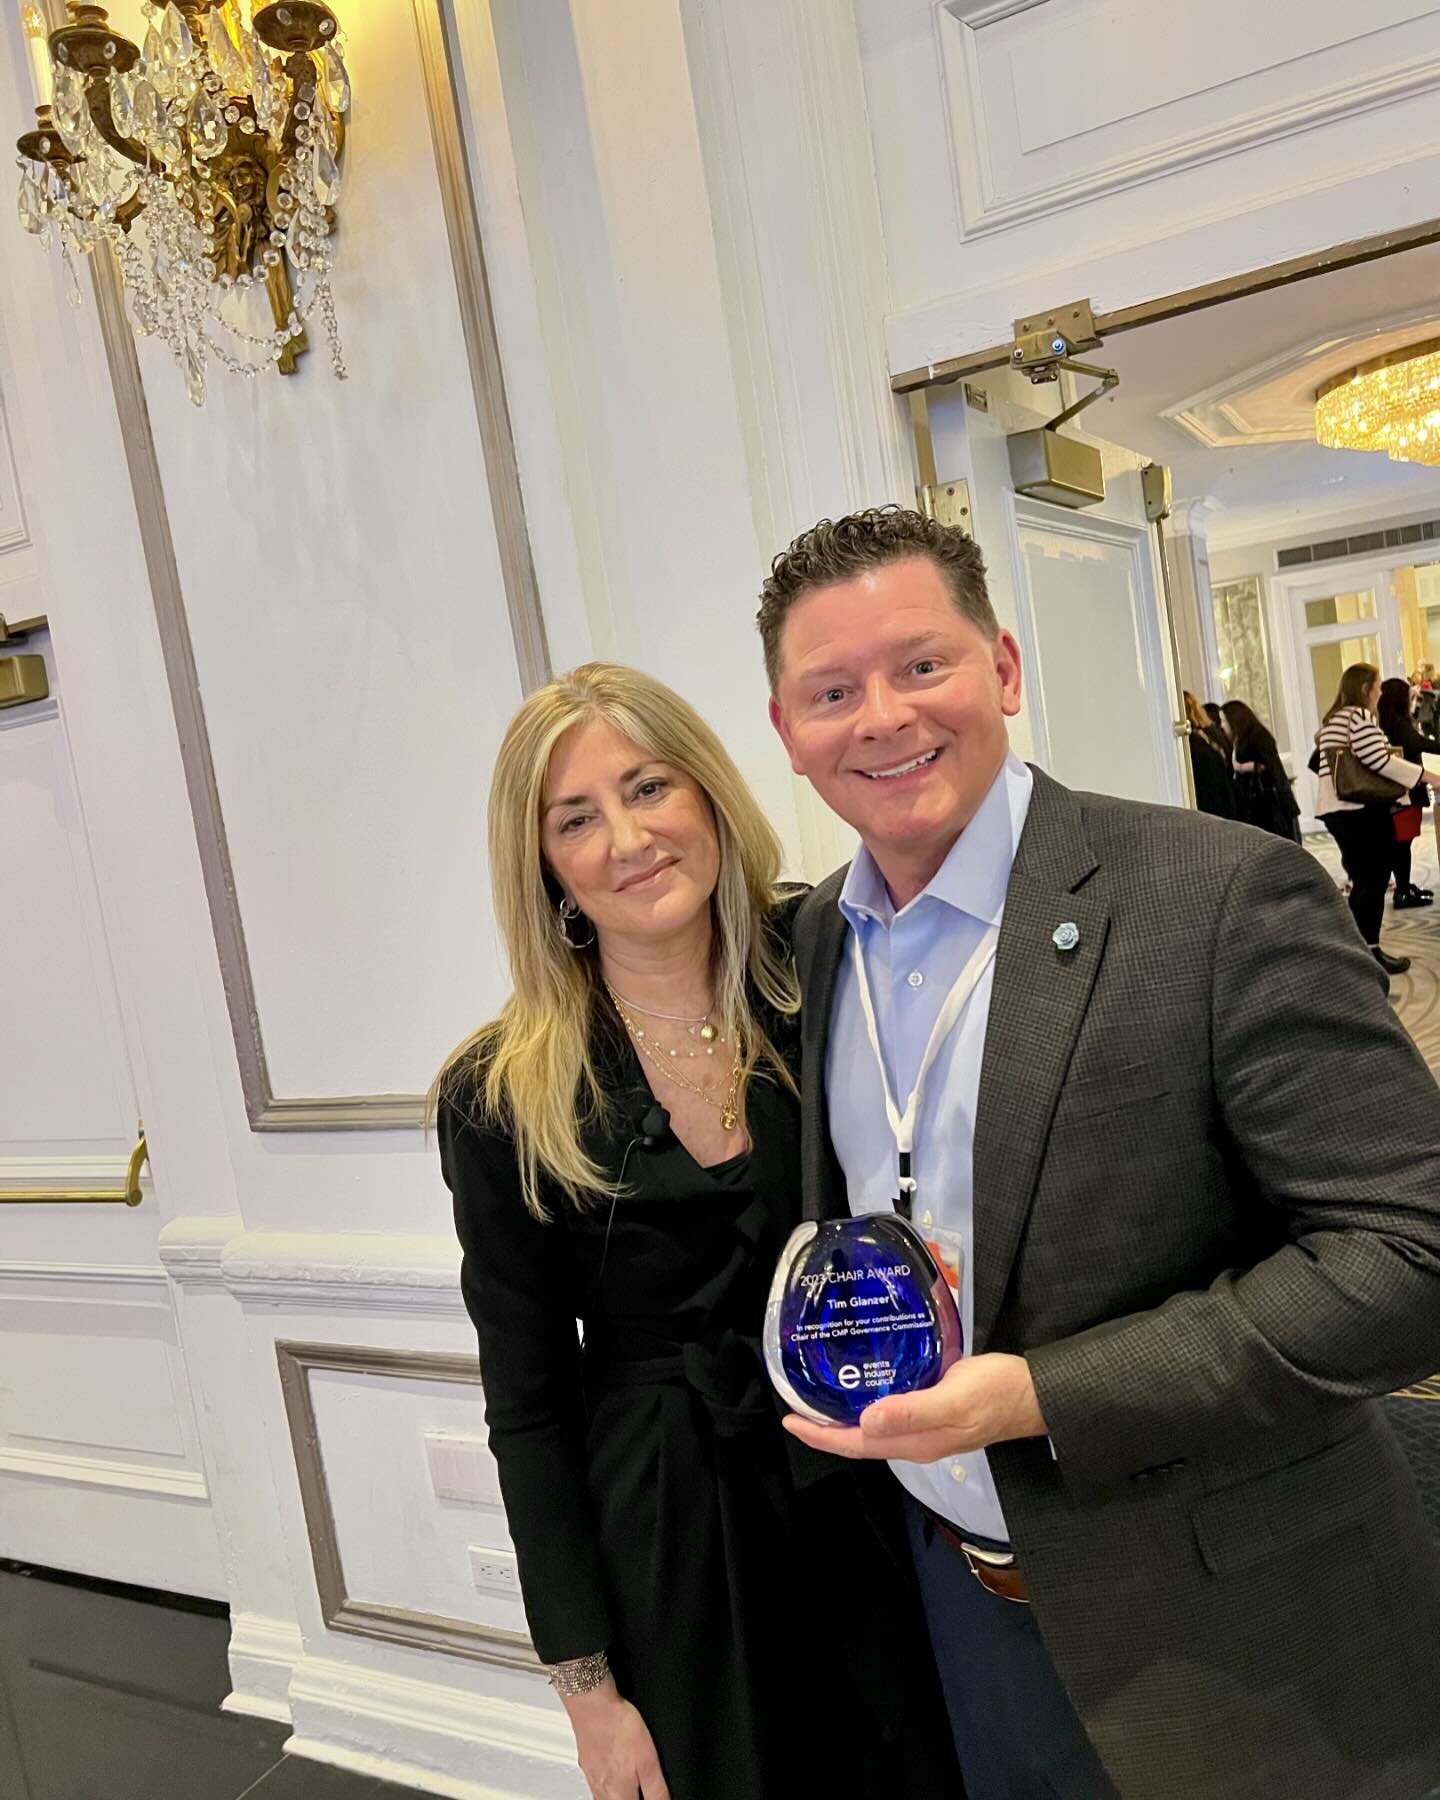 EIC 2023 Chair Award presented to our Chief Elevation Officer and inspiring leader Timothy Glanzer! There is no greater advocate for education, mentorship, and leadership. Thank you for sharing your love and passion for our industry with us every day